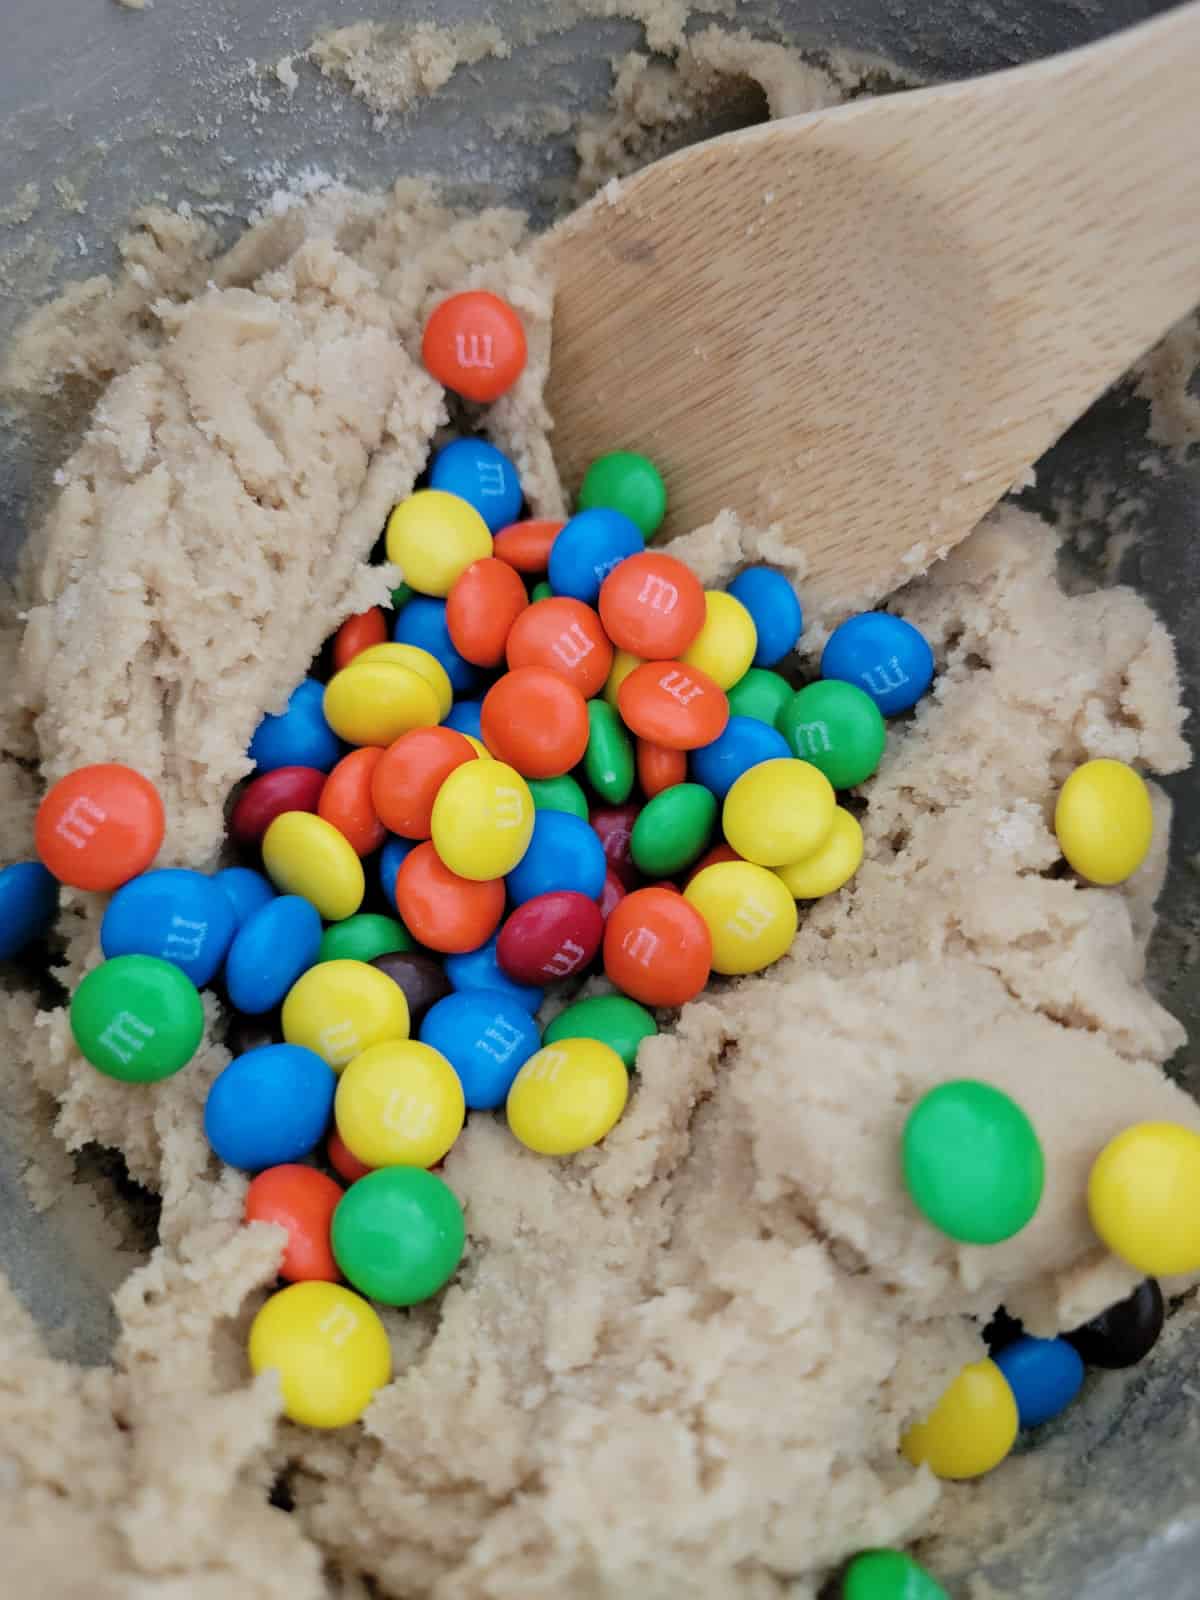 M&Ms in cookie dough with a wooden spoon